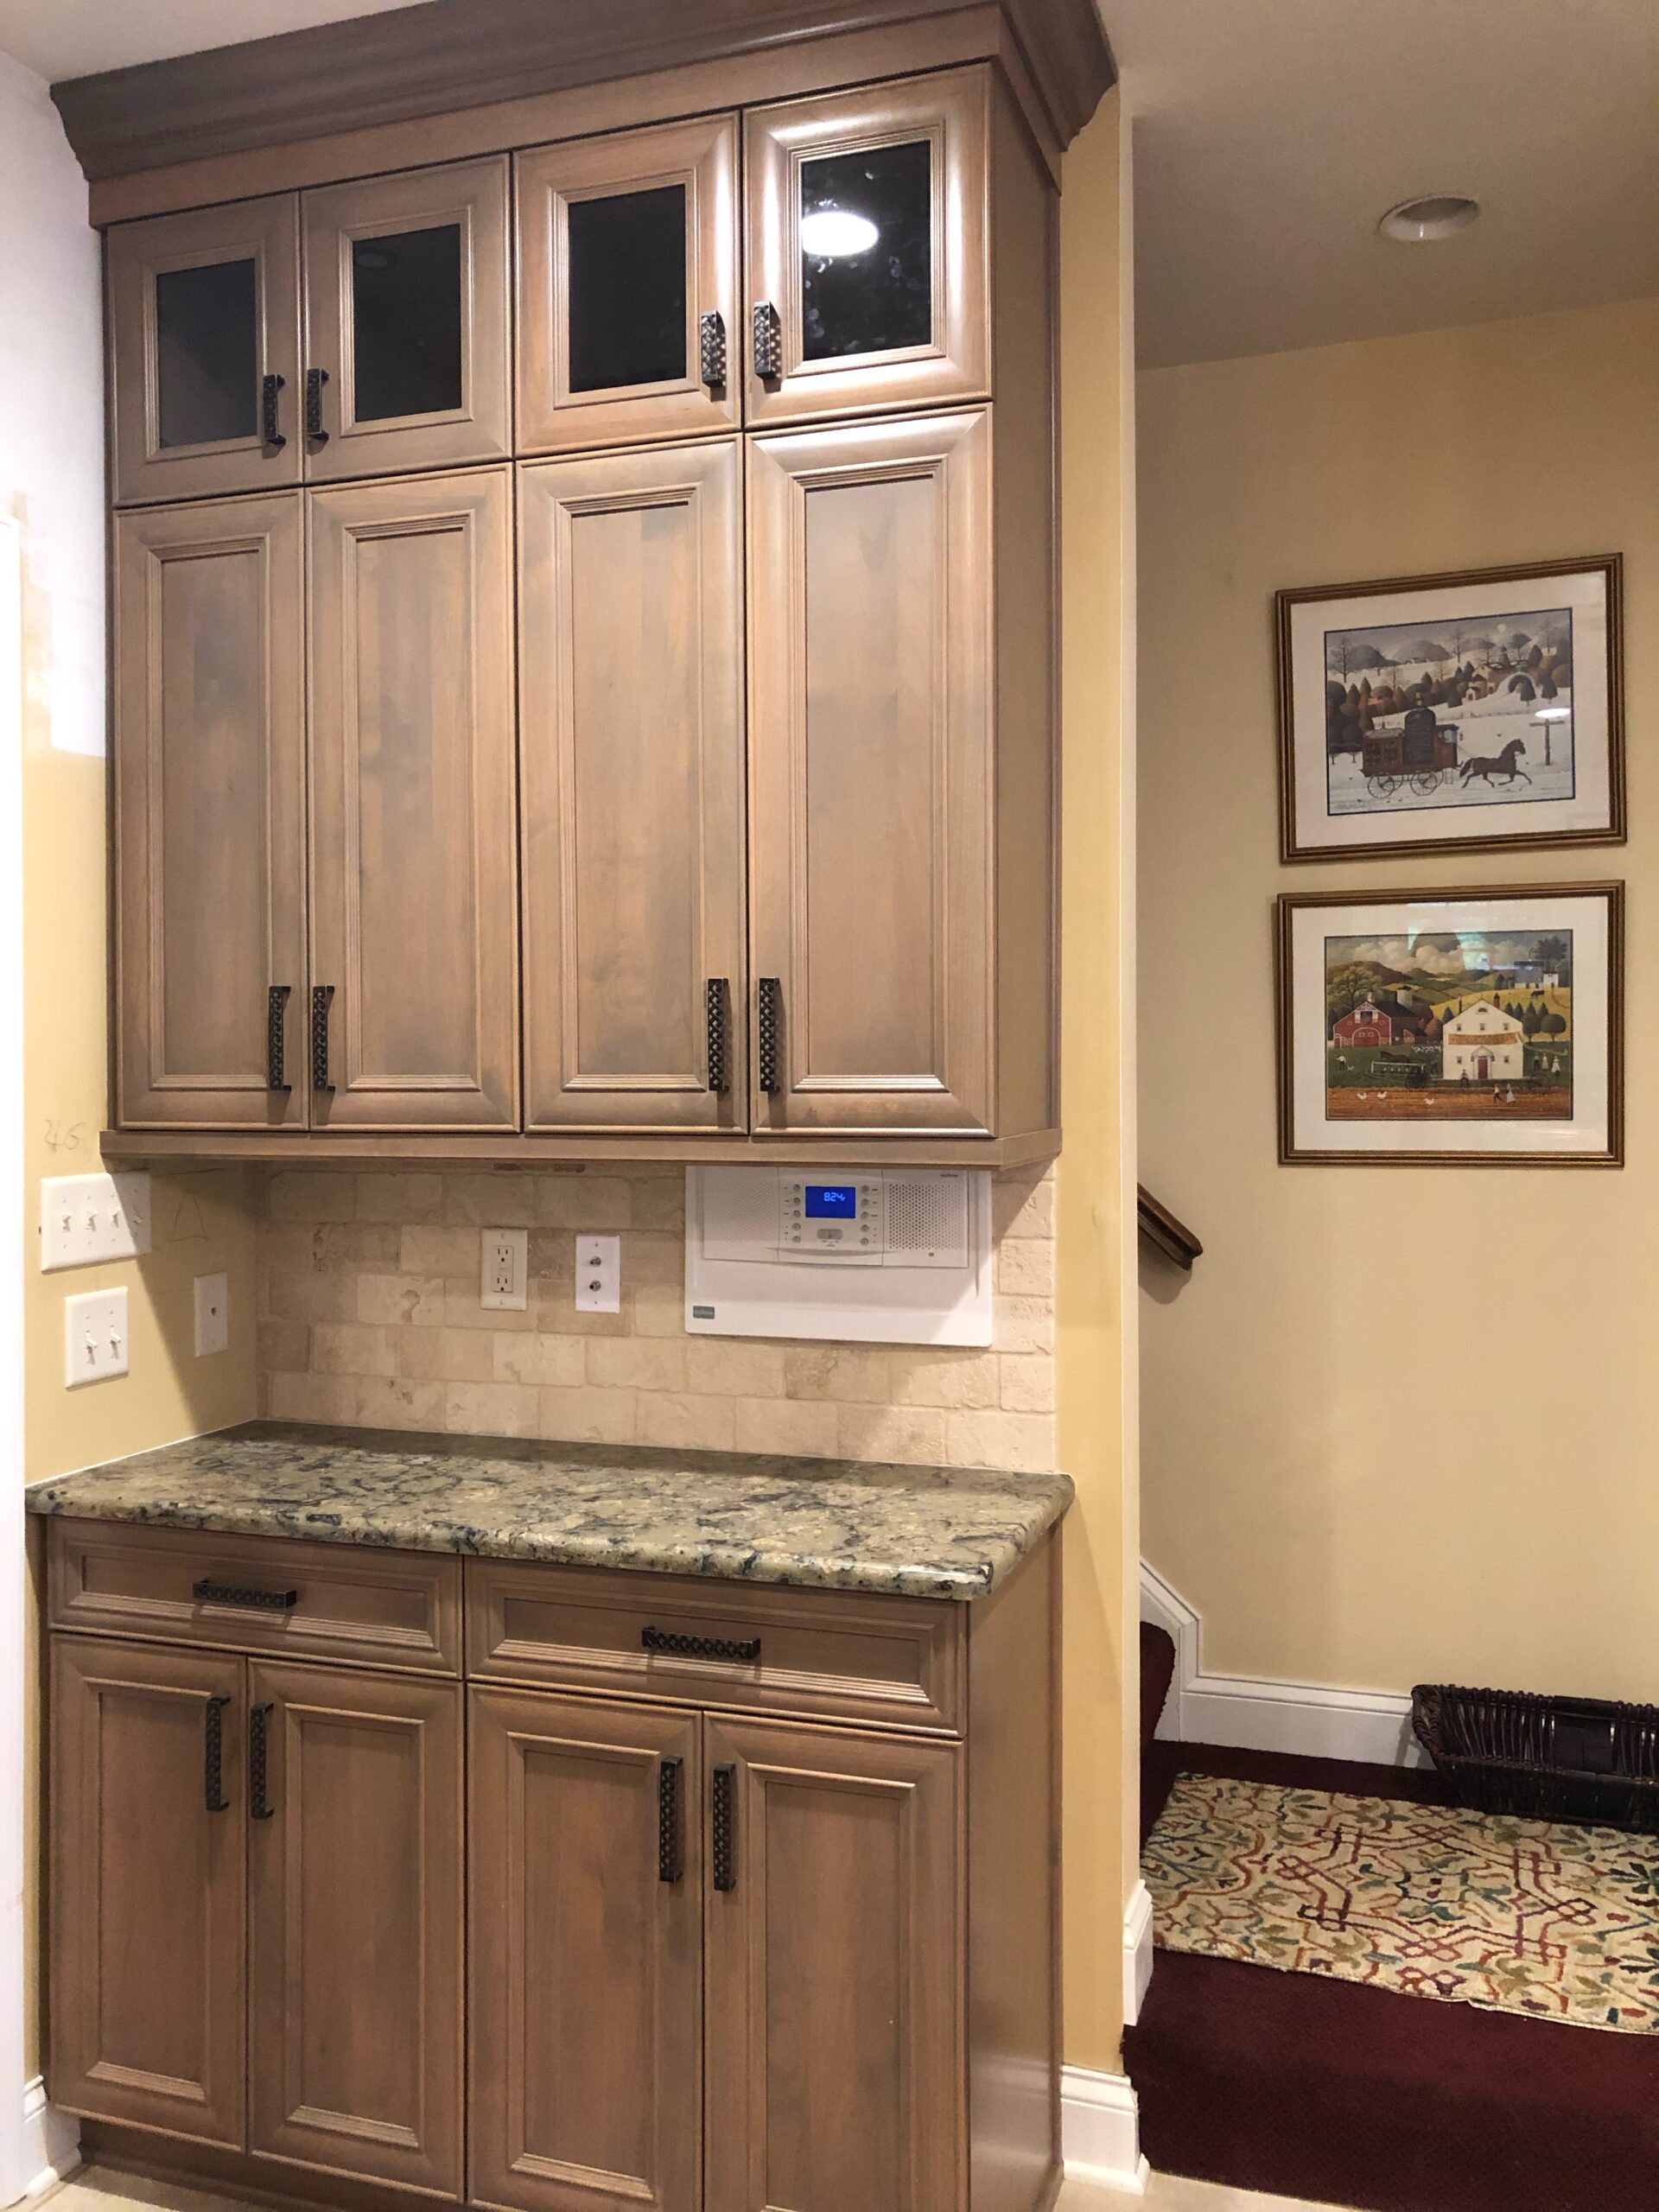 Traditional brown kitchen, traditional wooden furniture storage, butlers pantry